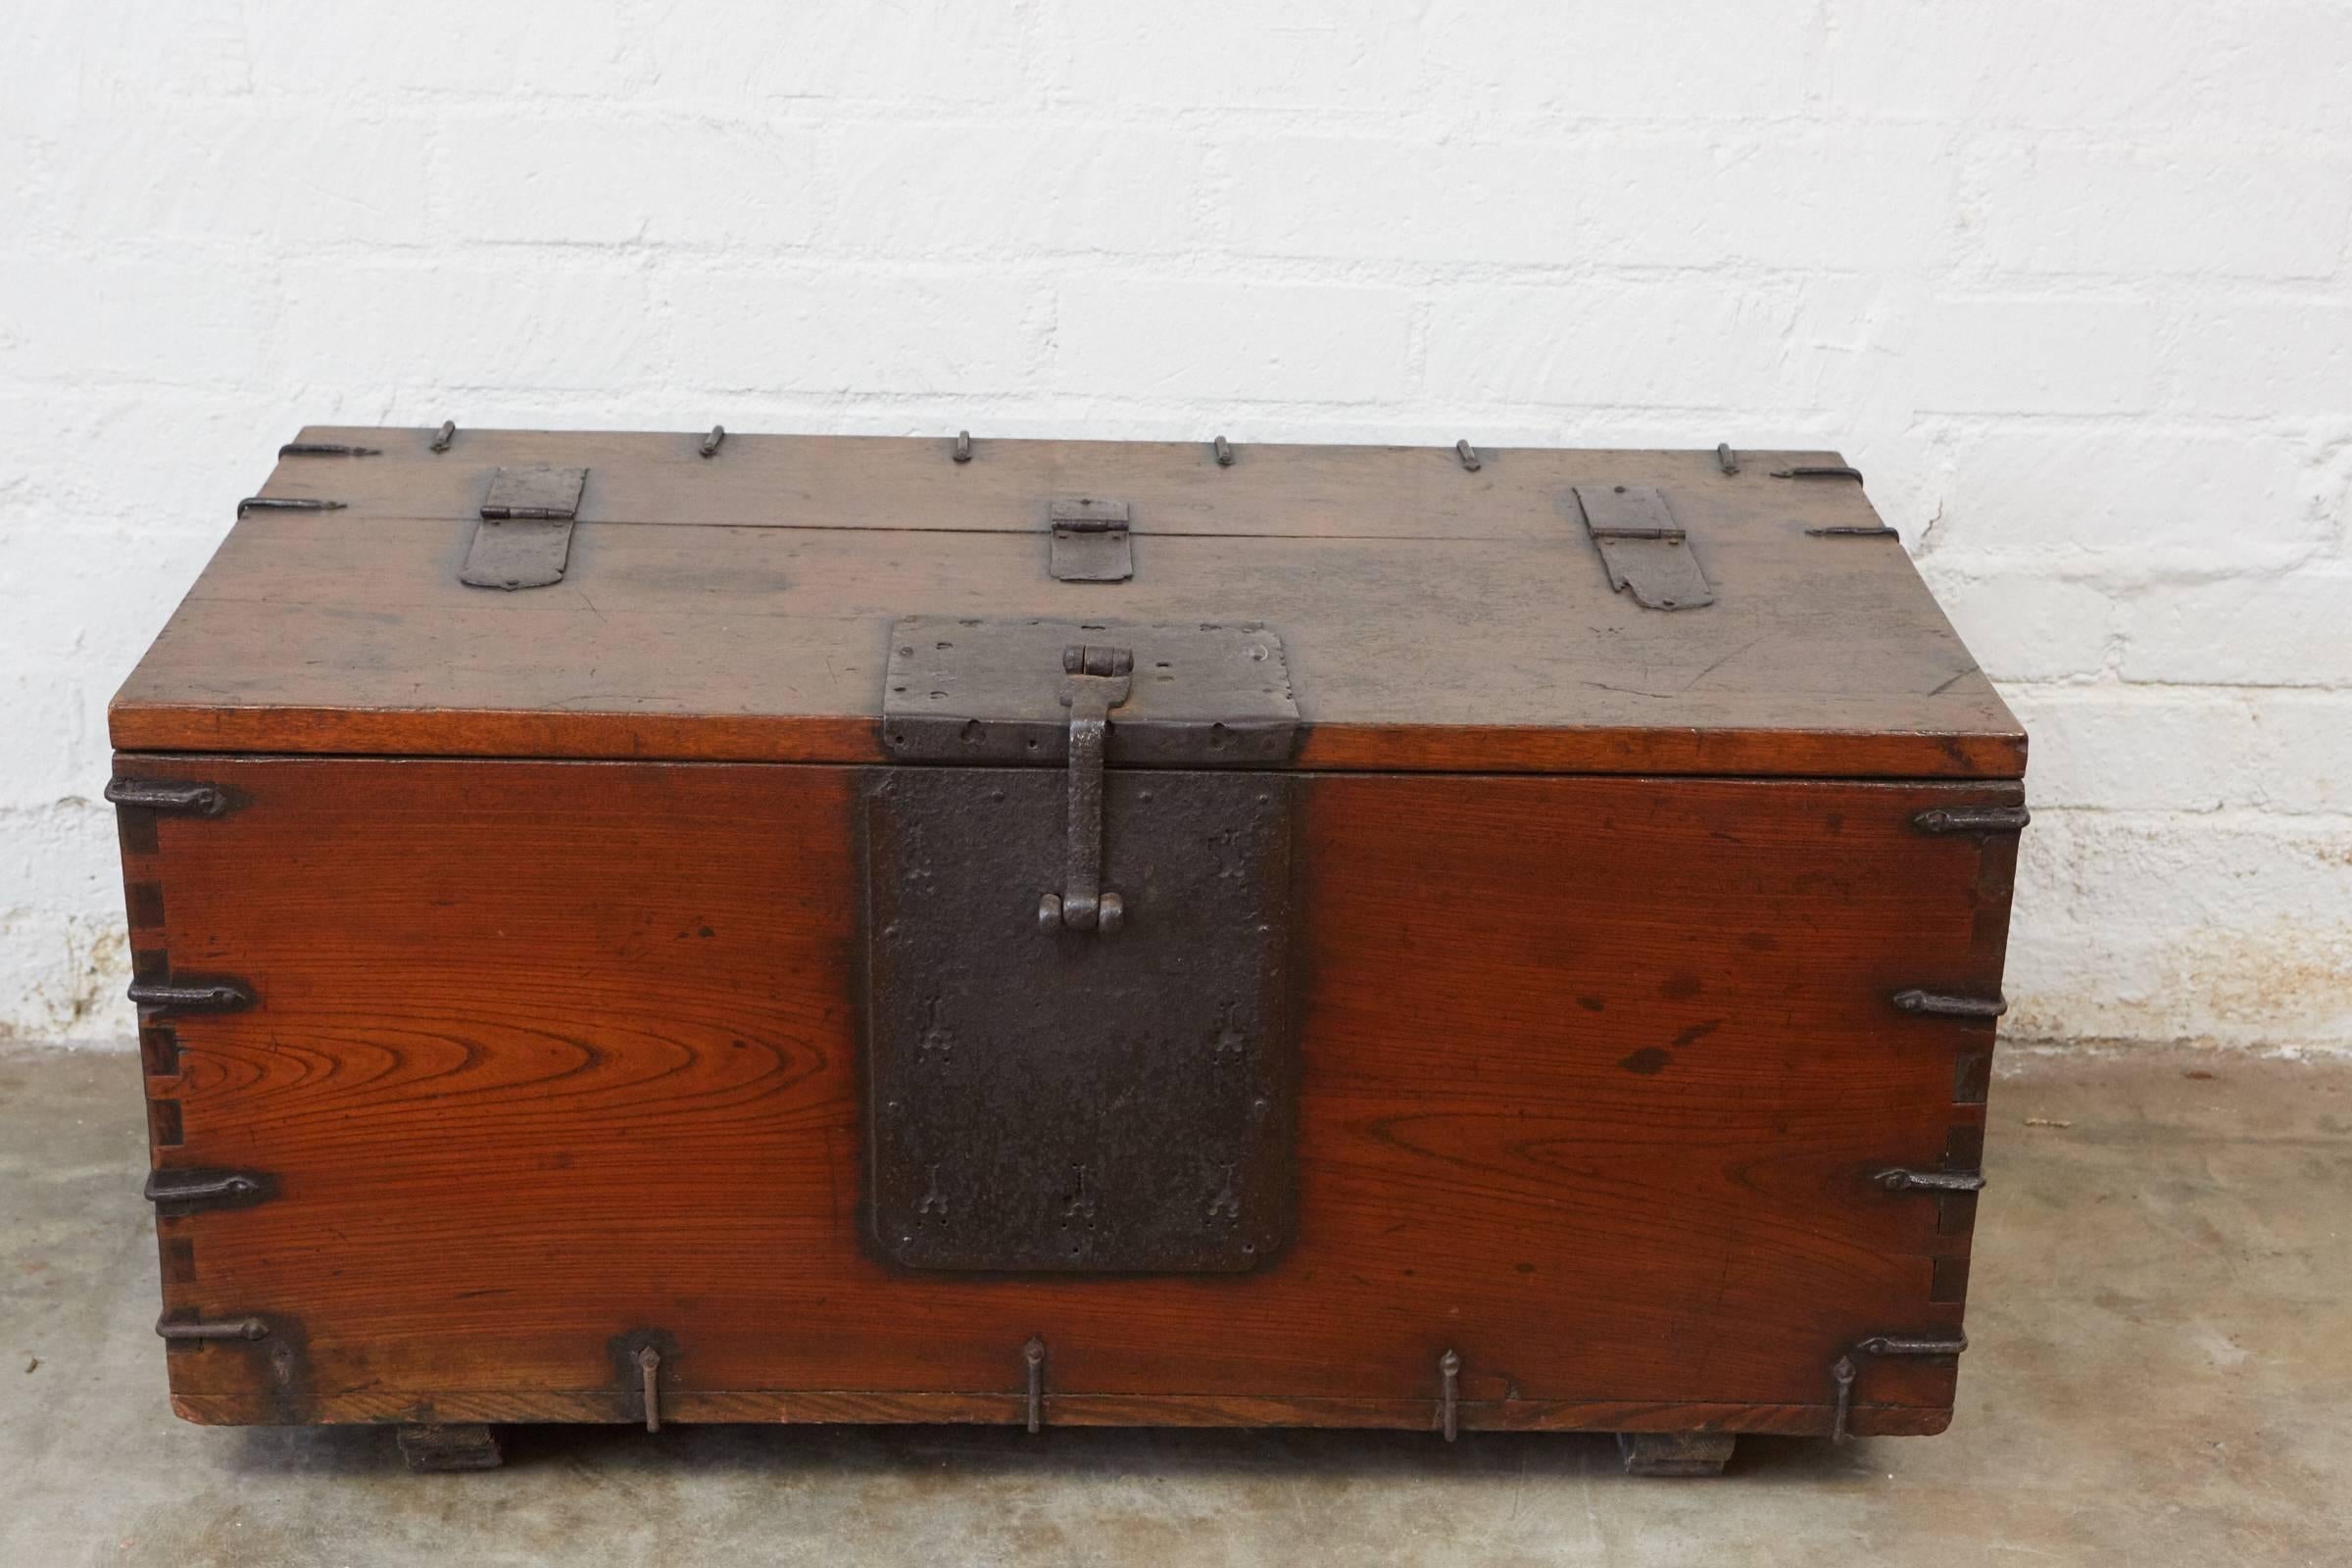 This impressive early 19th century Japanese trunk is made of Kiri wood with hand-forged iron fittings, hinges, handles and lock. The trunk sits on two wooden runners.